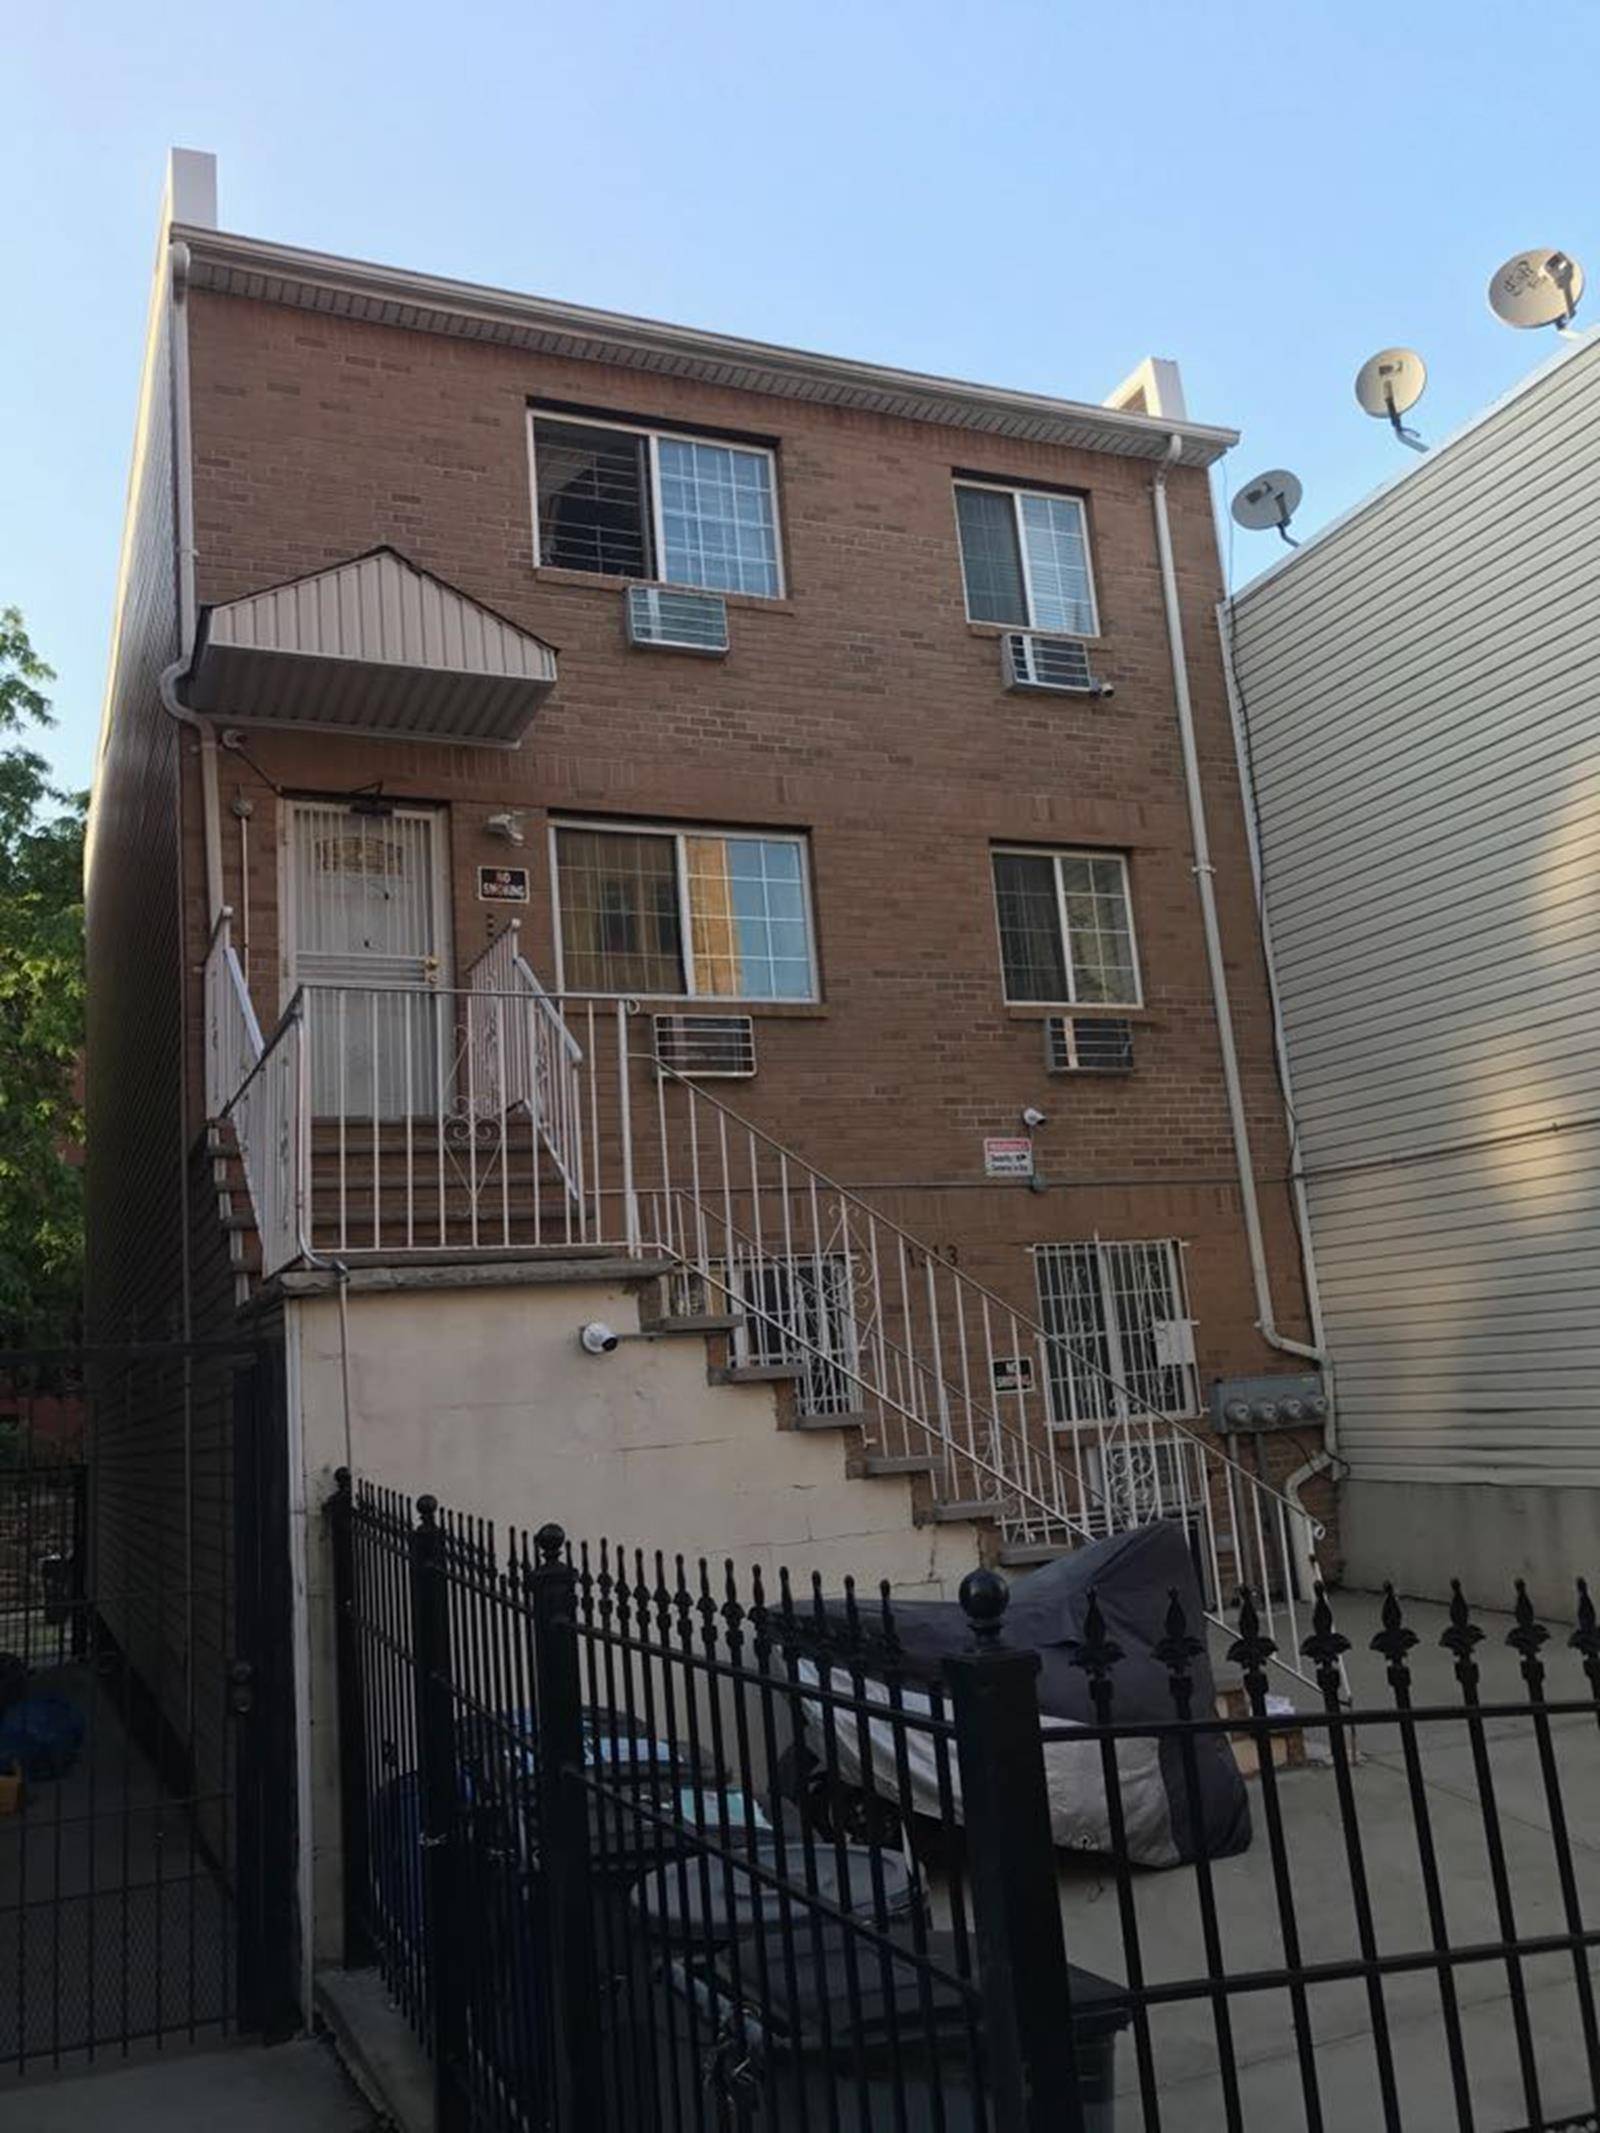 This wonderful 3 family brick home in the Bronx Hunts Point.